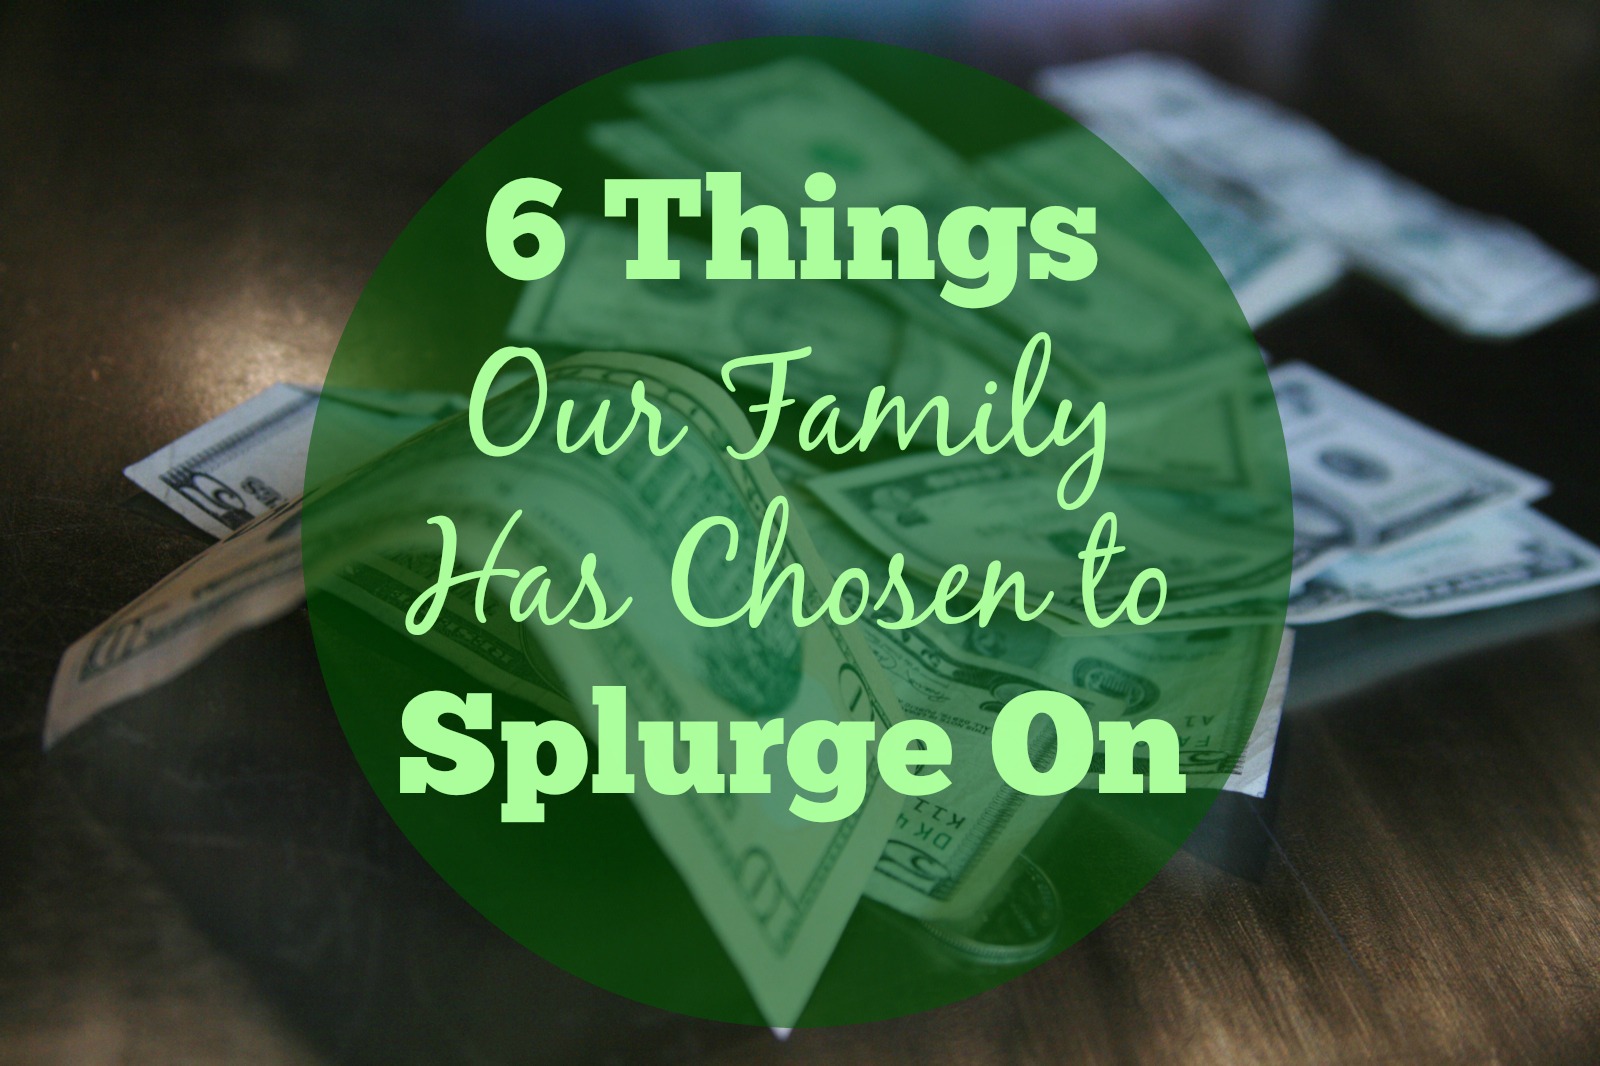 6 Things Our Family Has Chosen to Splurge On